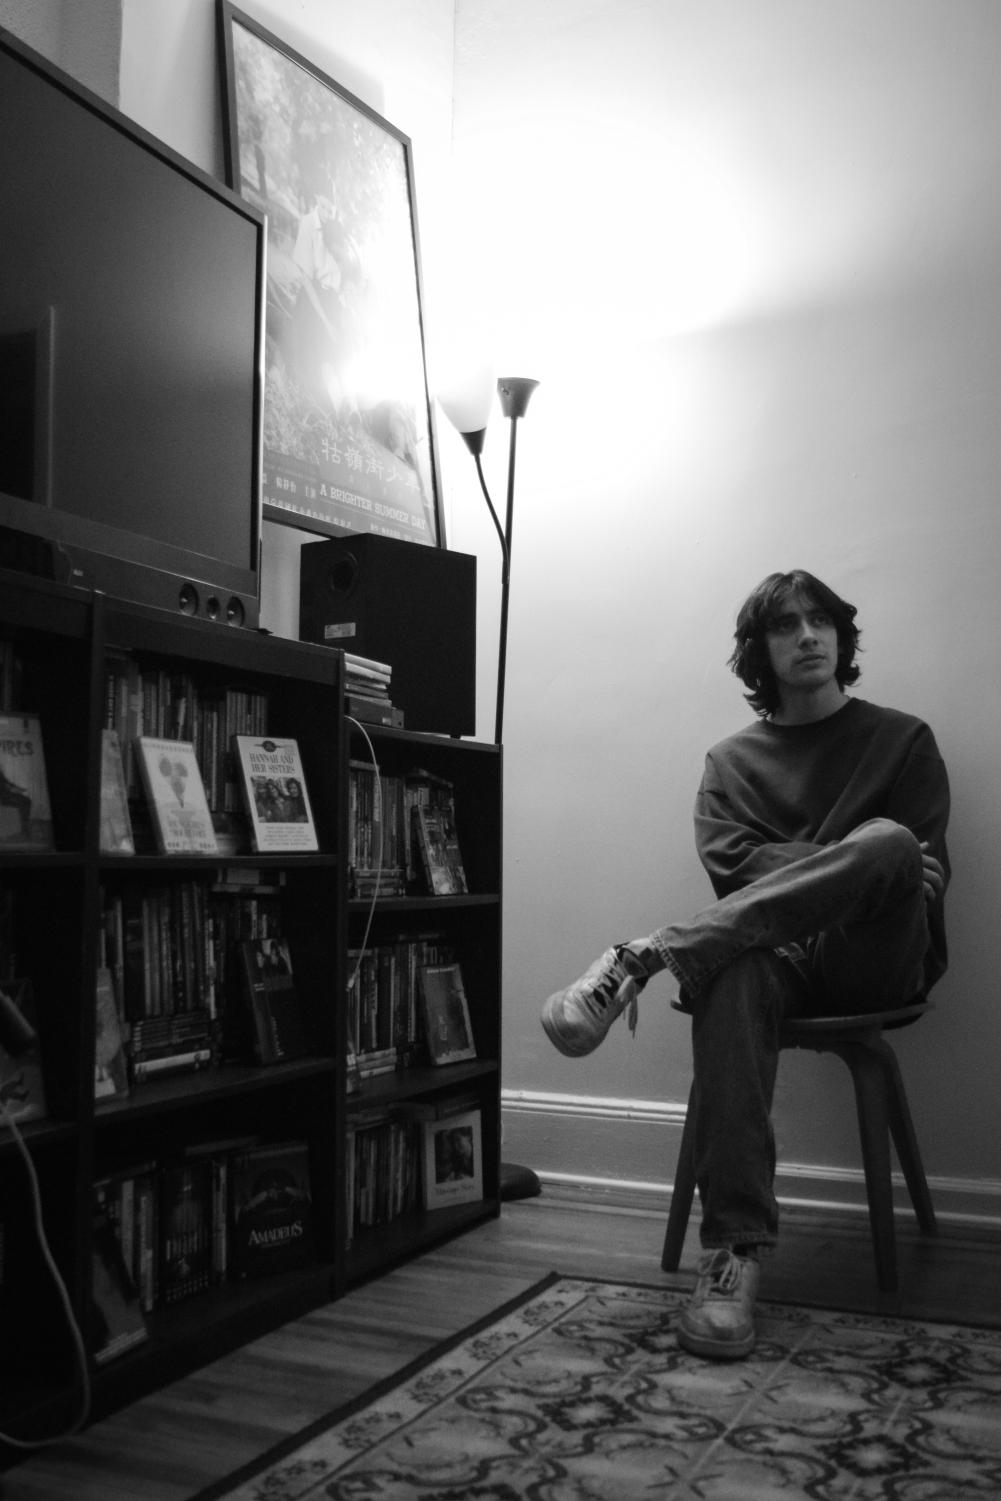 A black-and-white image of a male college student with long, fluffy, light hair wearing a plain crew neck sweatshirt, jeans, and light sneakers sitting in a chair next to a bookshelf. The bookshelf has a television on top and a full-length lamp next to it. The student has one leg crossed and is looking to their right.